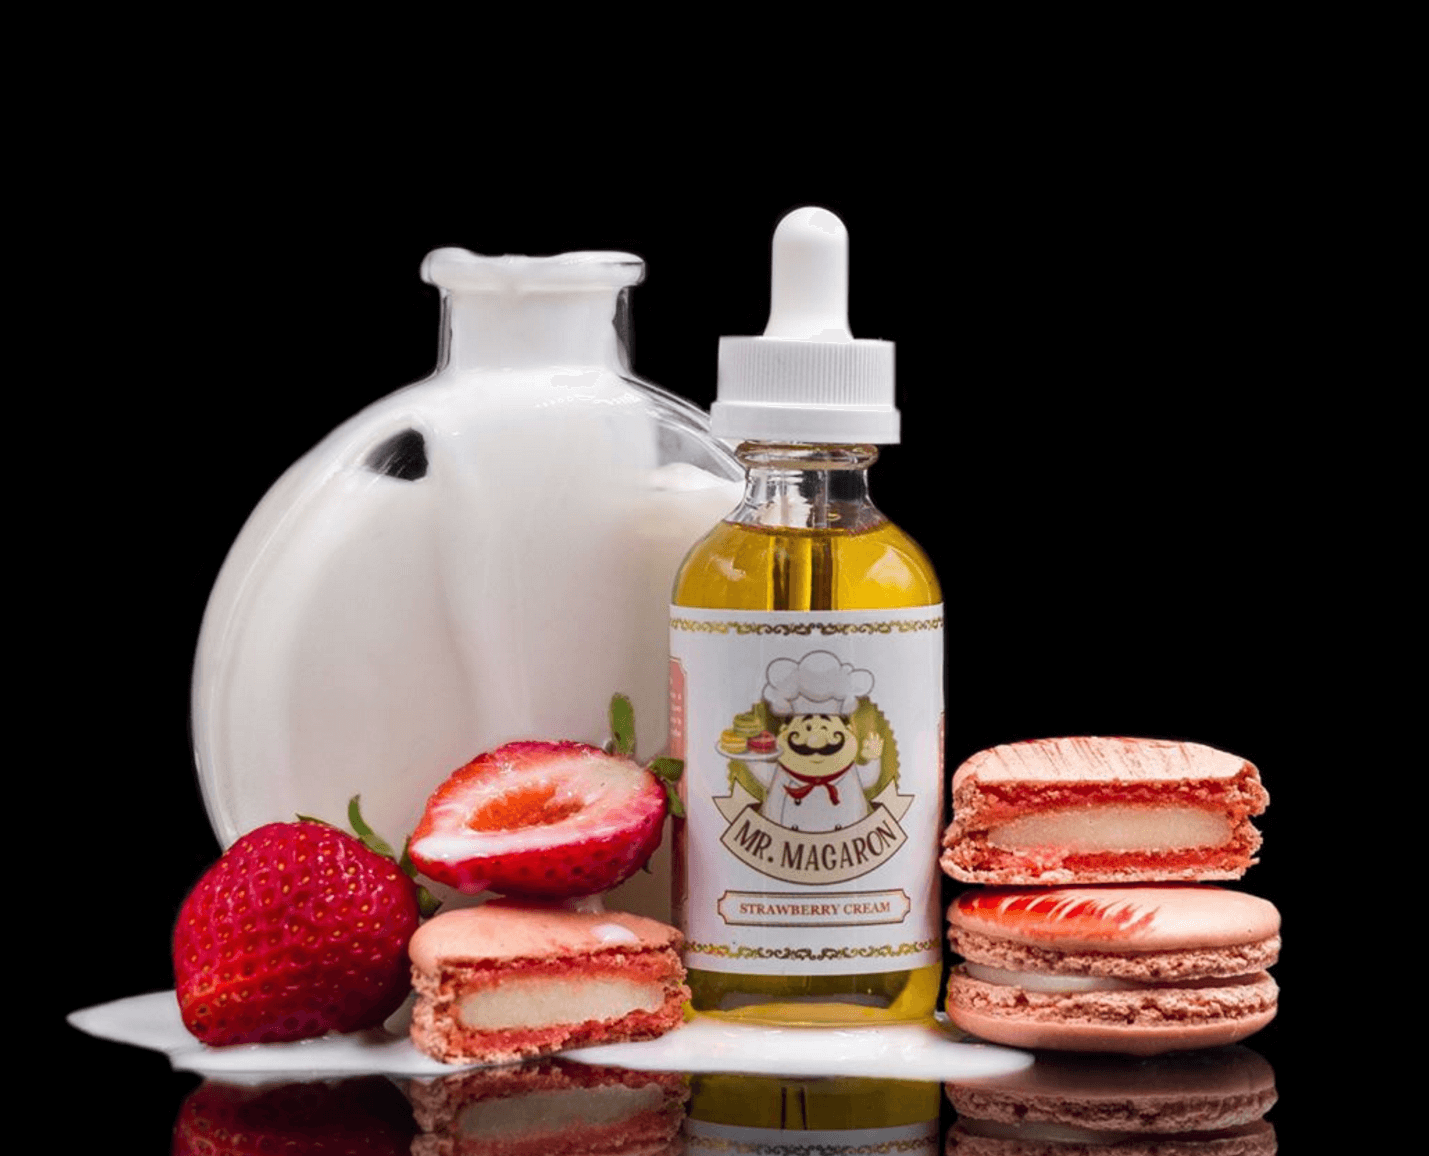 E-liquid flavors you should try if you have a sweet tooth